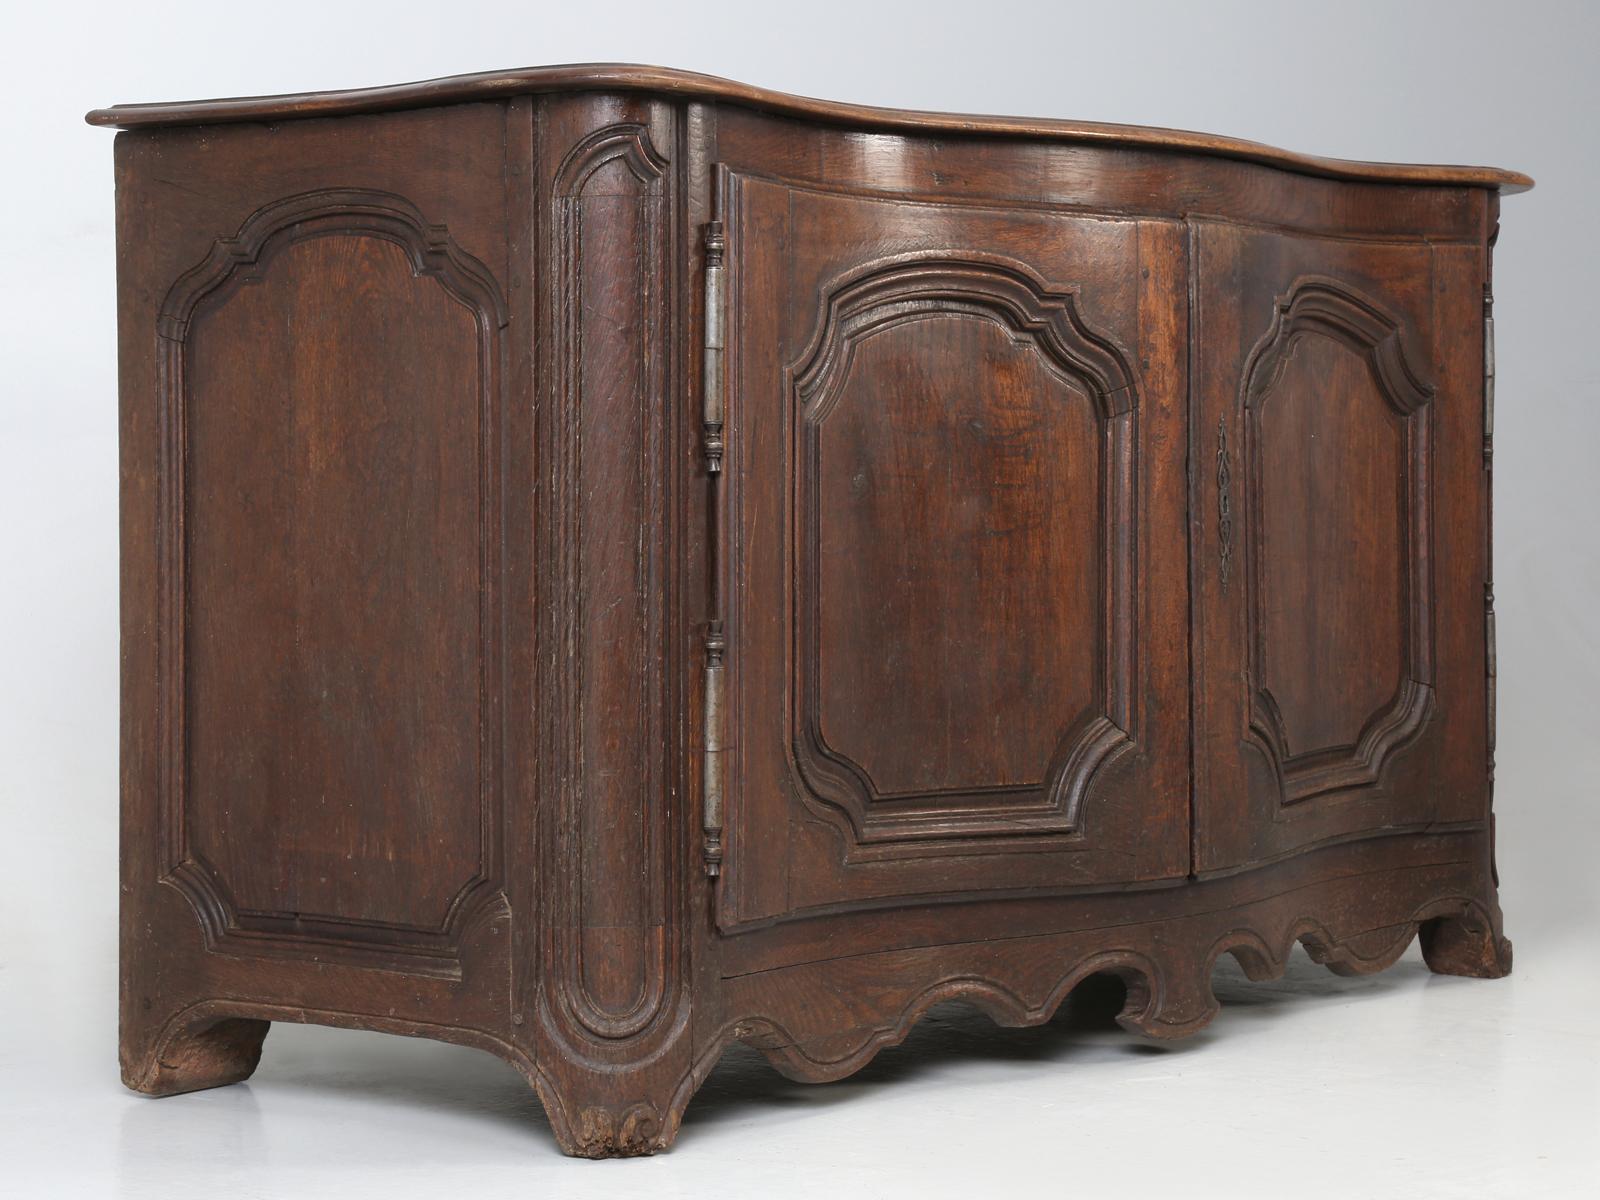 When you are an old seasoned antique dealer, every once in a while, something comes in the door and screams, take me home! This 18th century French walnut serpentine buffet had me measuring every wall in the house, to see if it would squeeze in